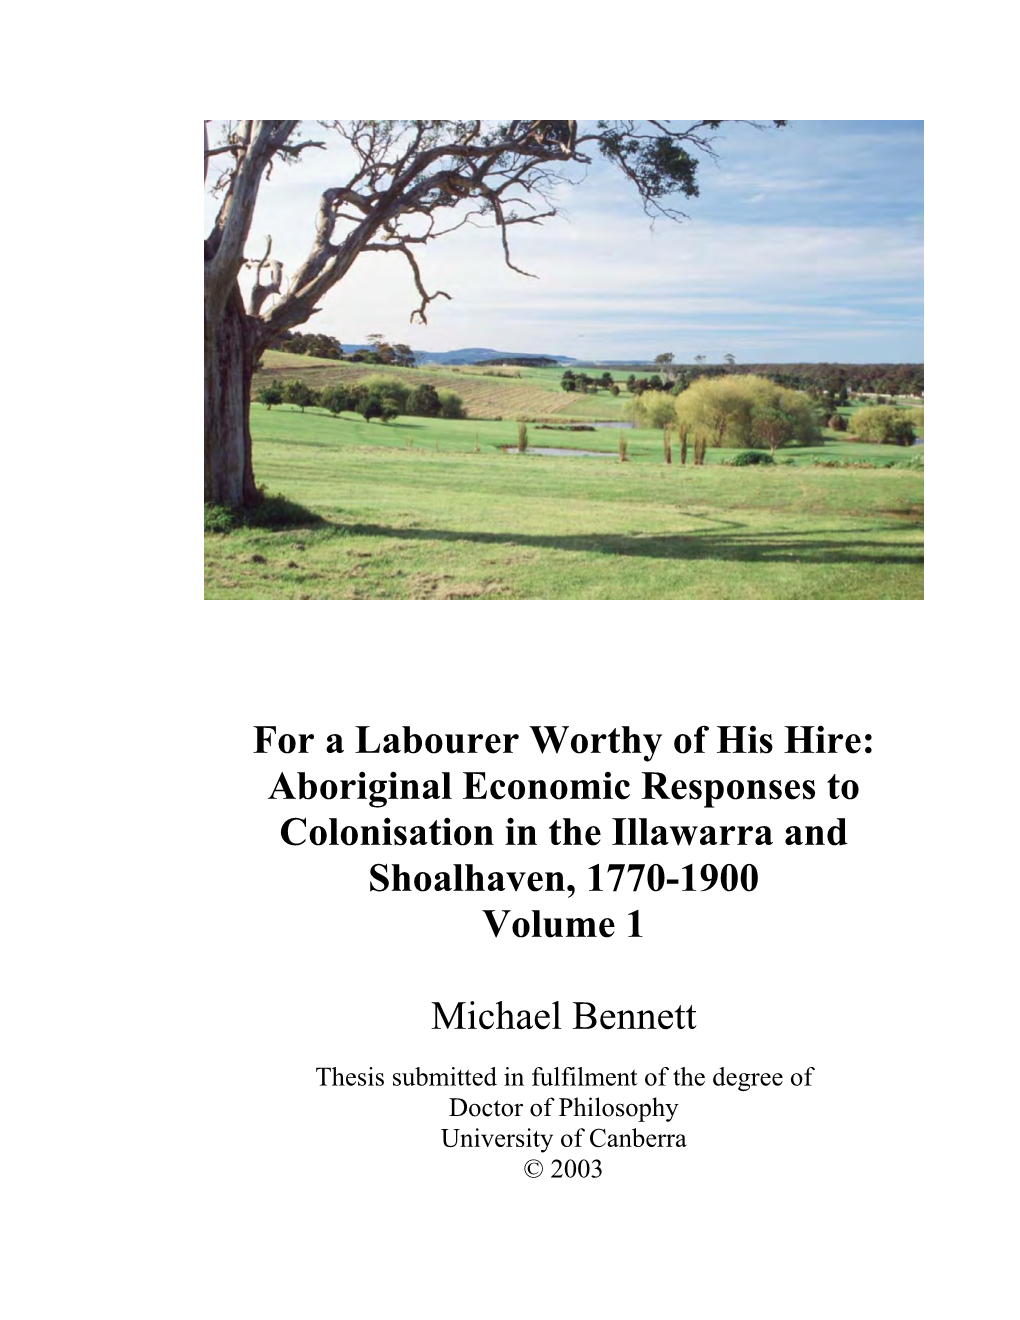 For a Labourer Worthy of His Hire: Aboriginal Economic Responses to Colonisation in the Illawarra and Shoalhaven, 1770-1900 Volume 1